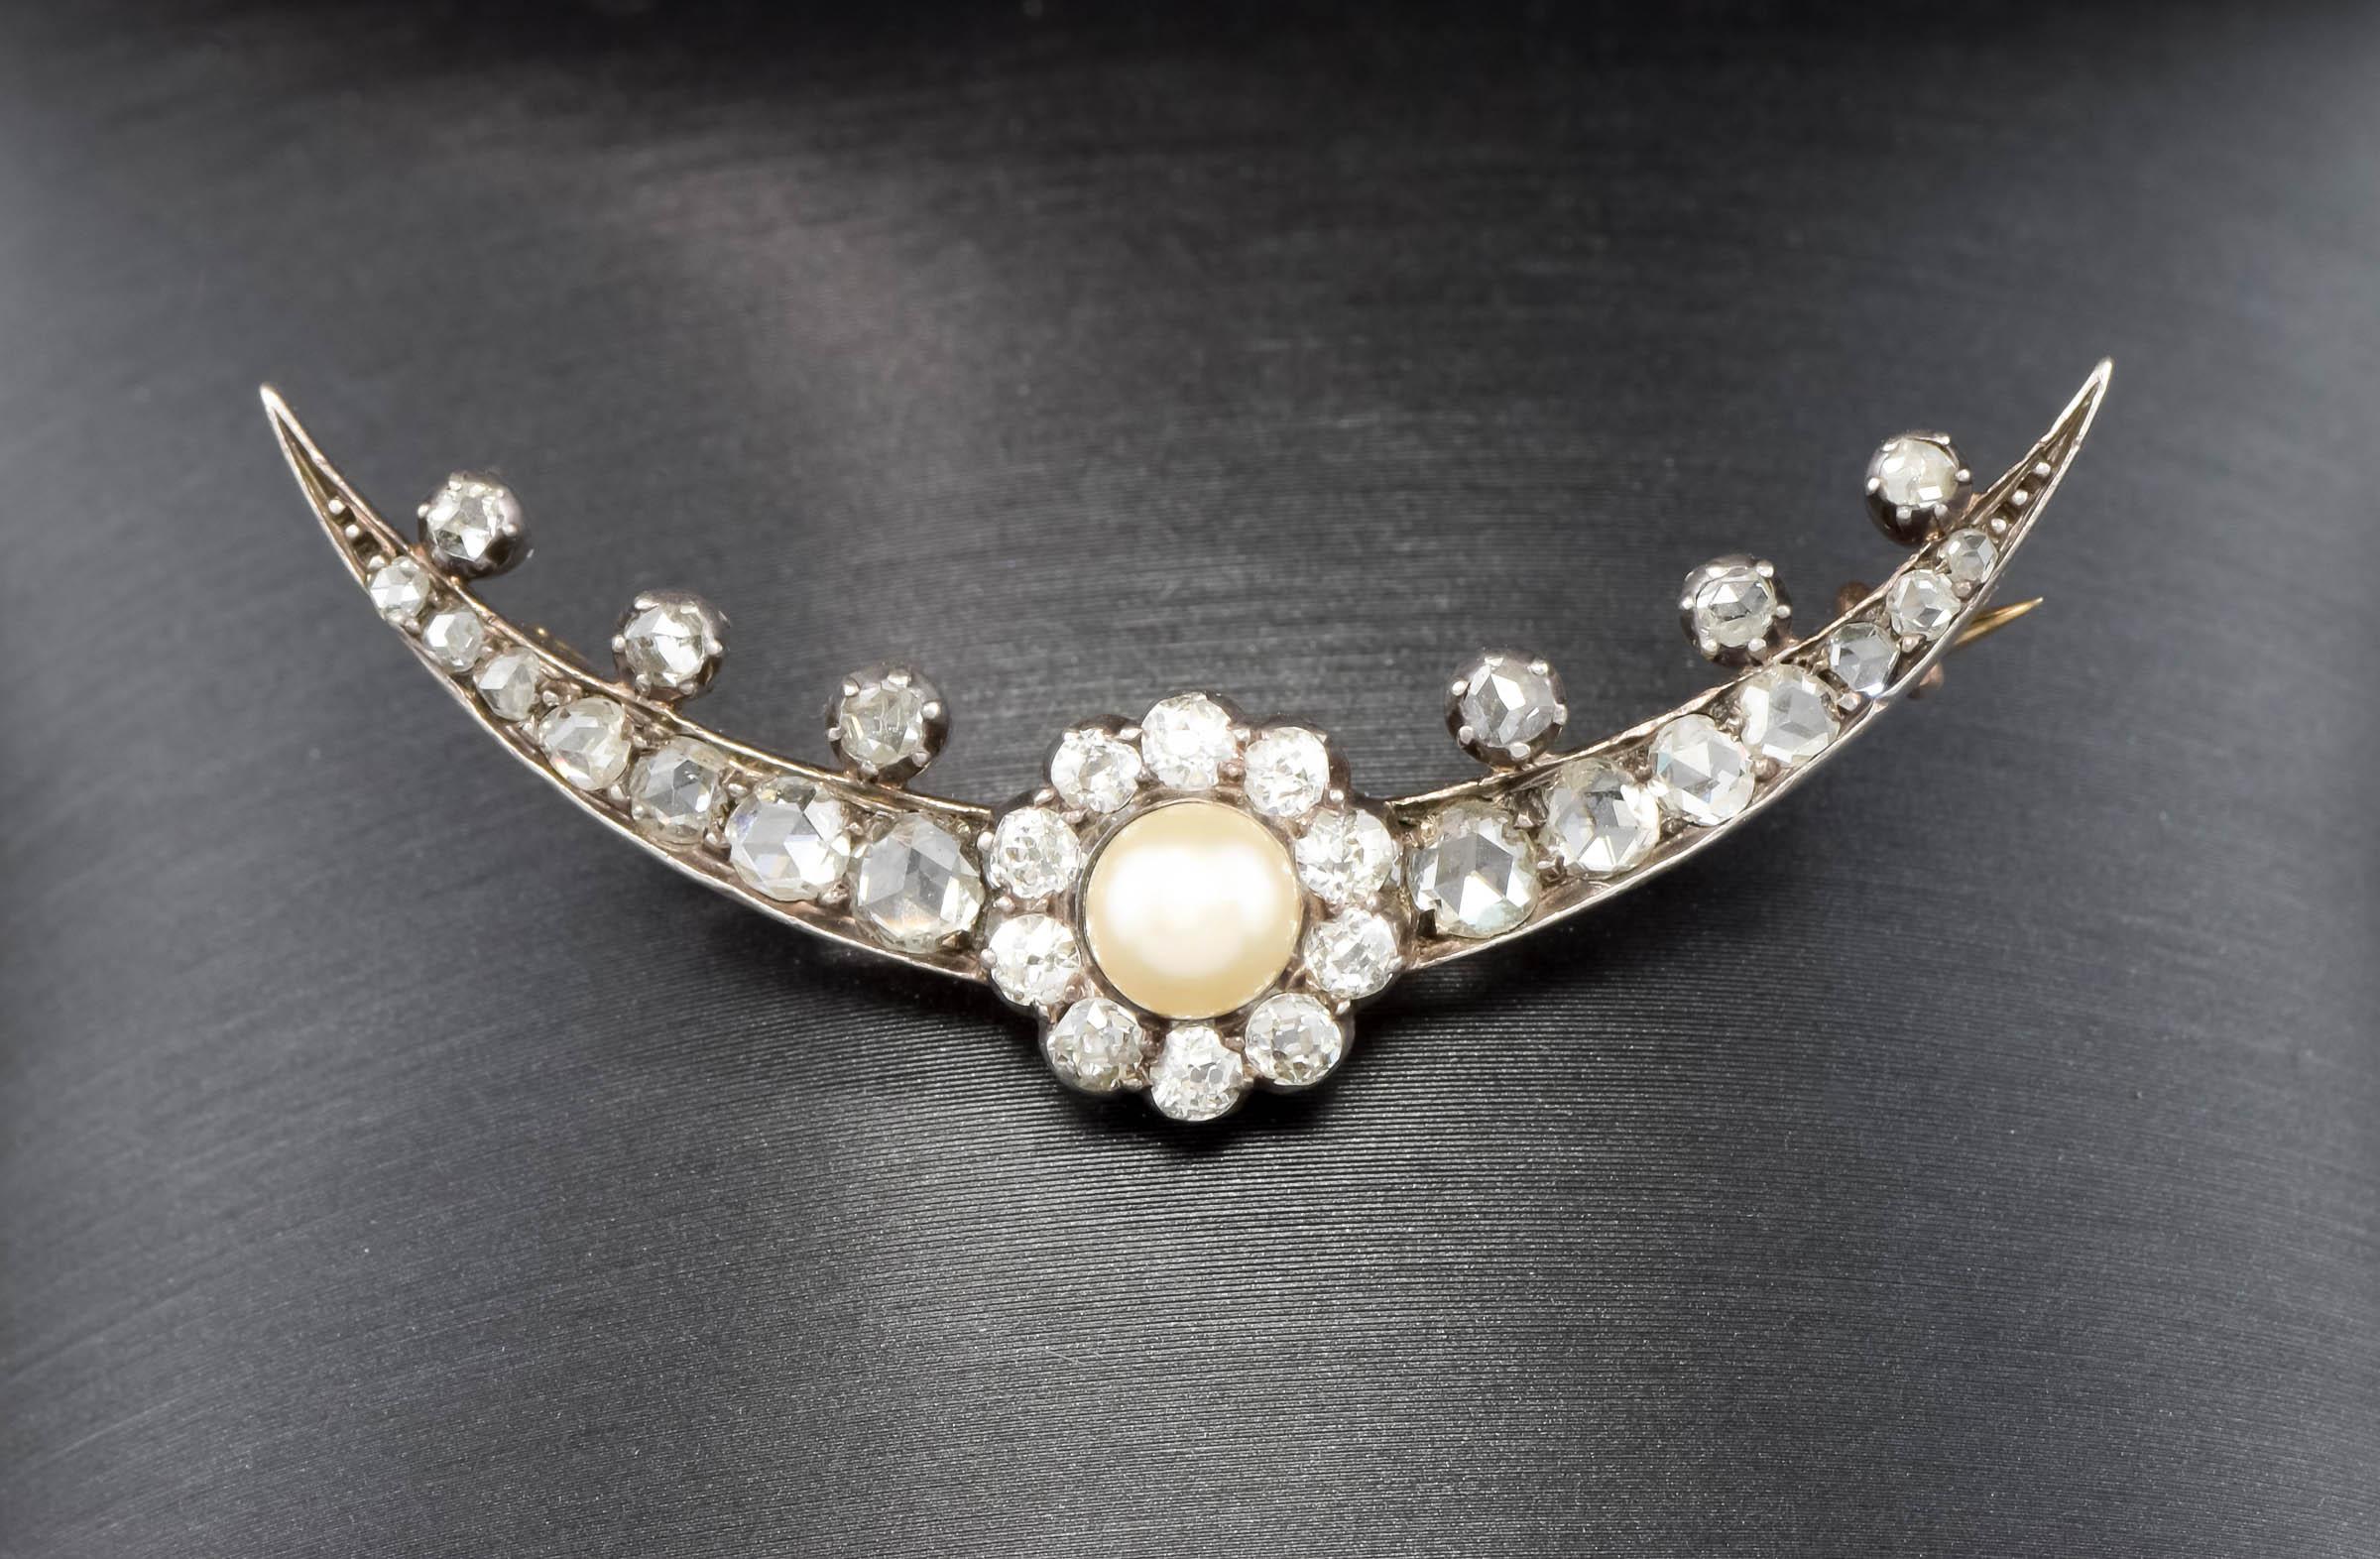 So elegant, this Celestial Diamond & Pearl Crescent Moon brooch has some of the prettiest and most sparkly diamonds.  It’s wonderful as a brooch but would also convert beautifully to a necklace or pendant, should you desire.

Crafted of gold testing